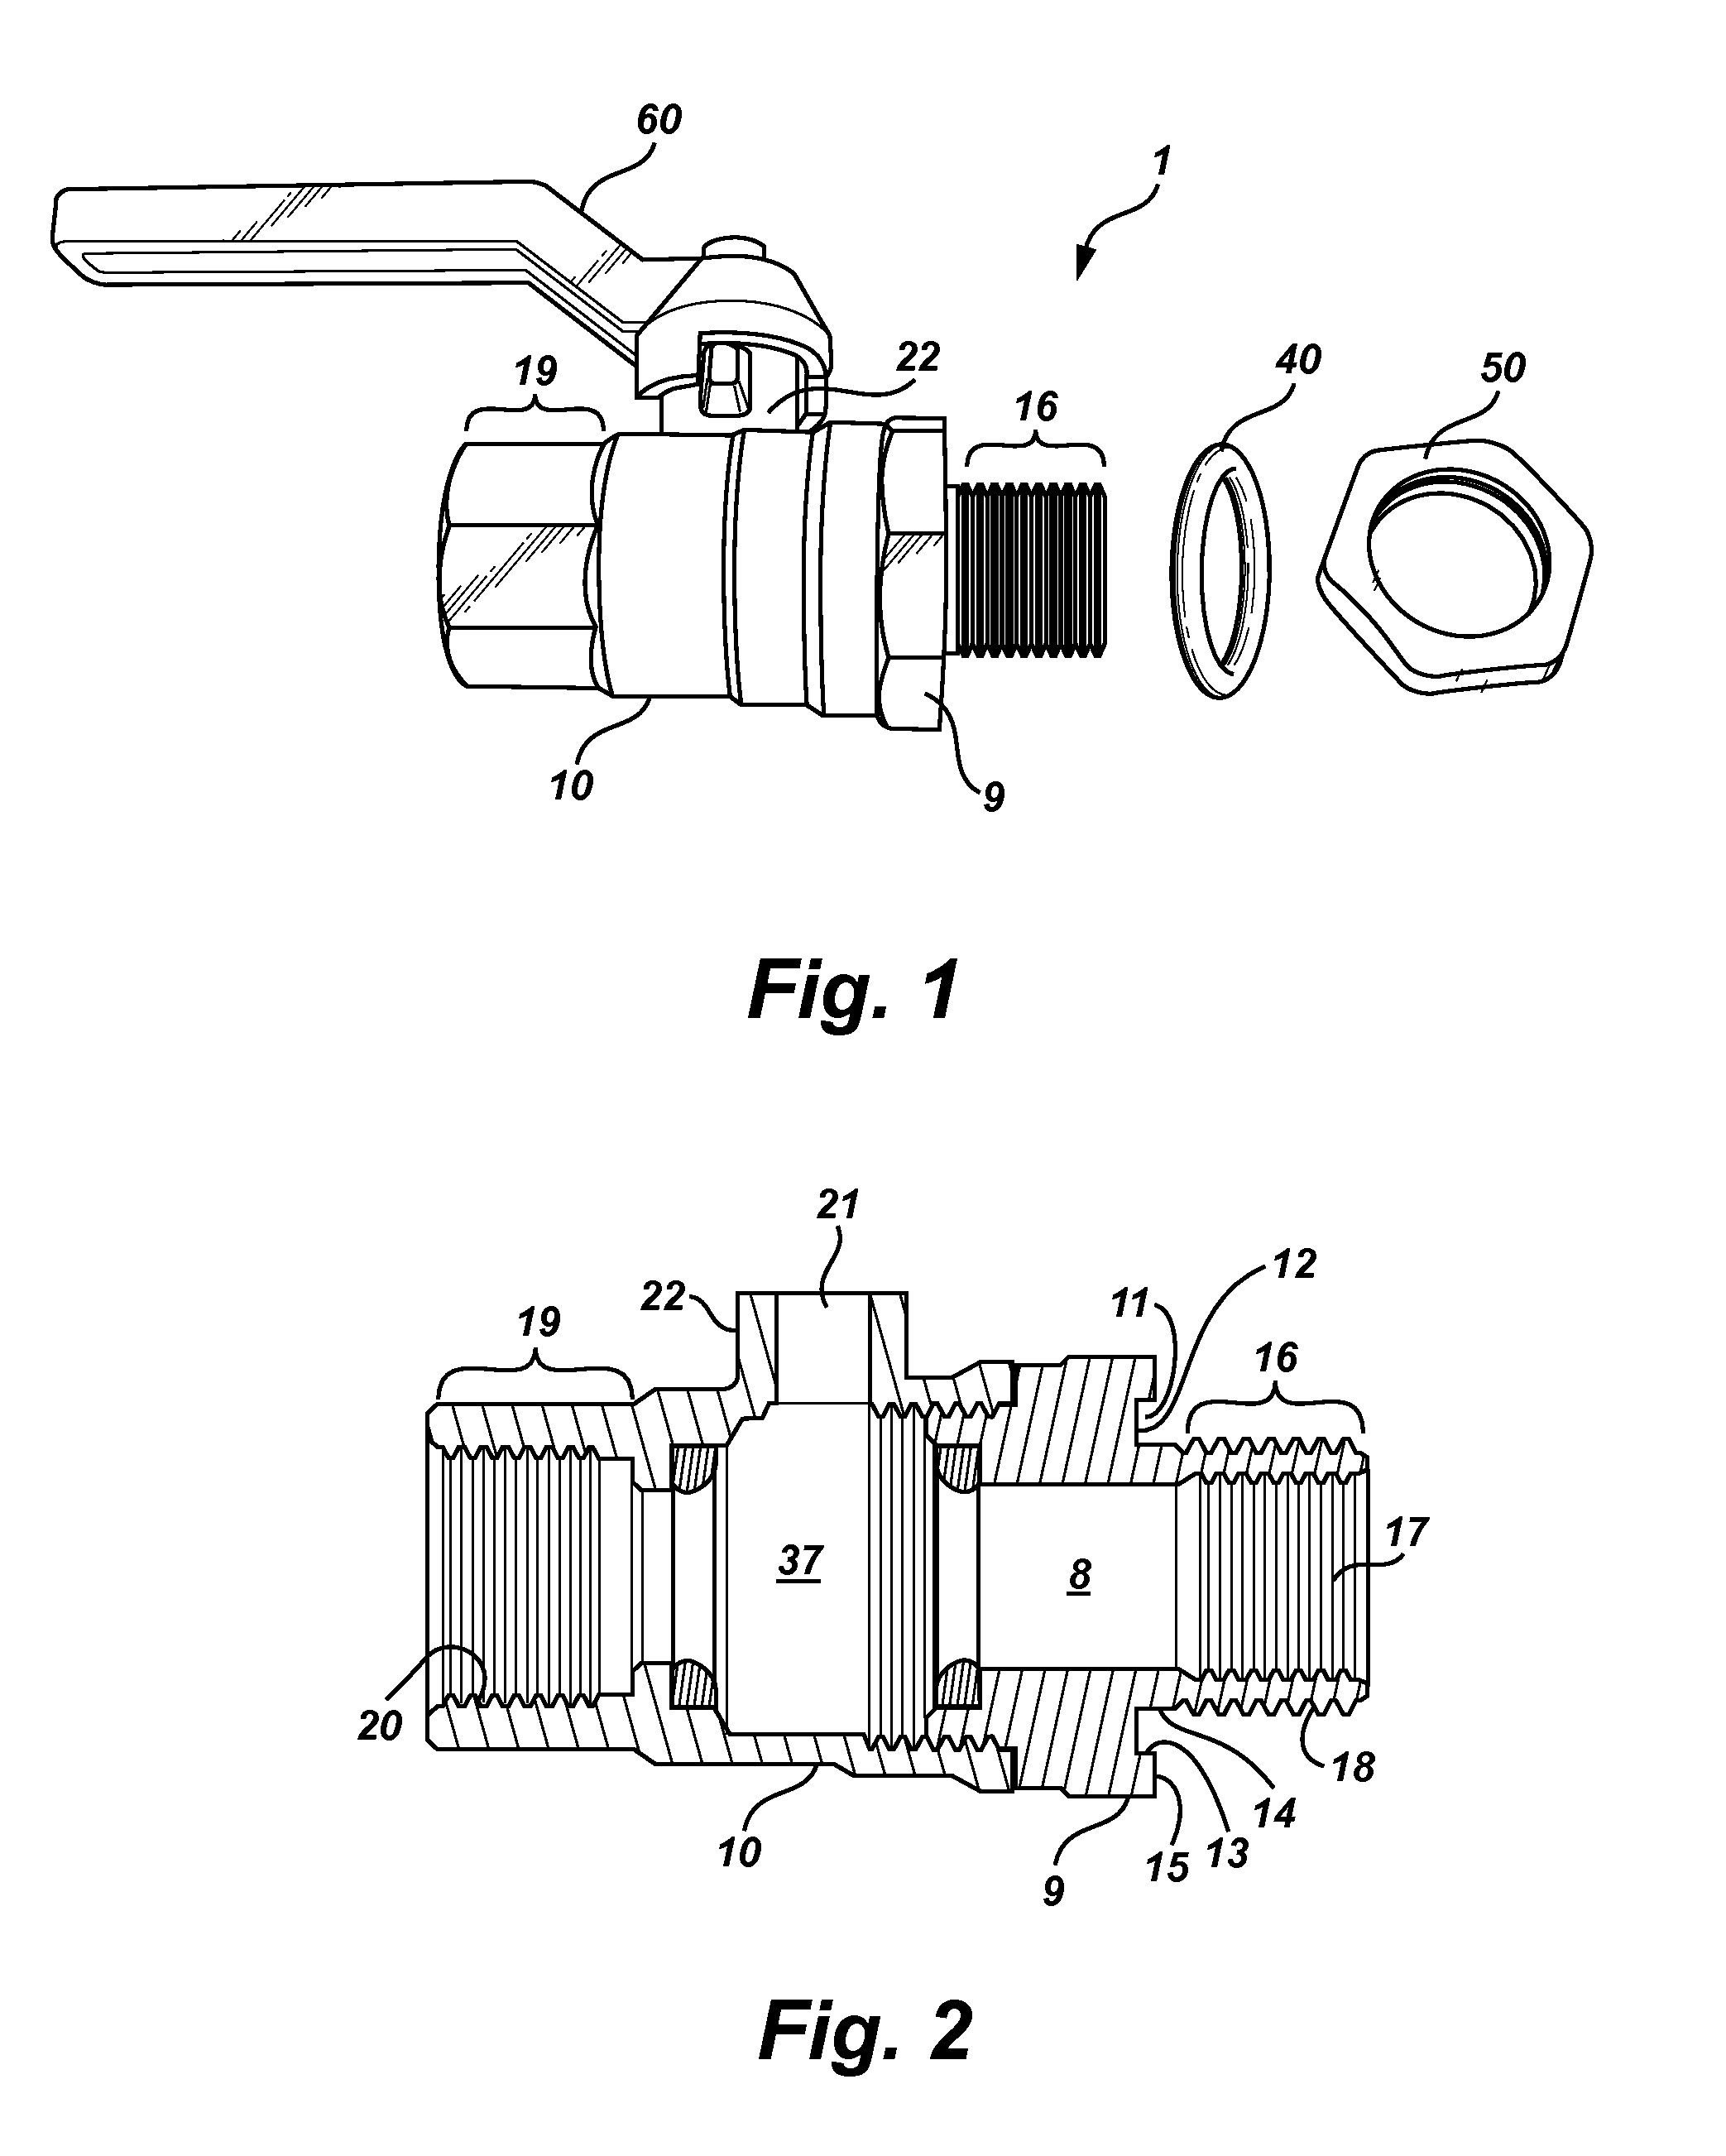 Kettle valve assembly with retained O ring